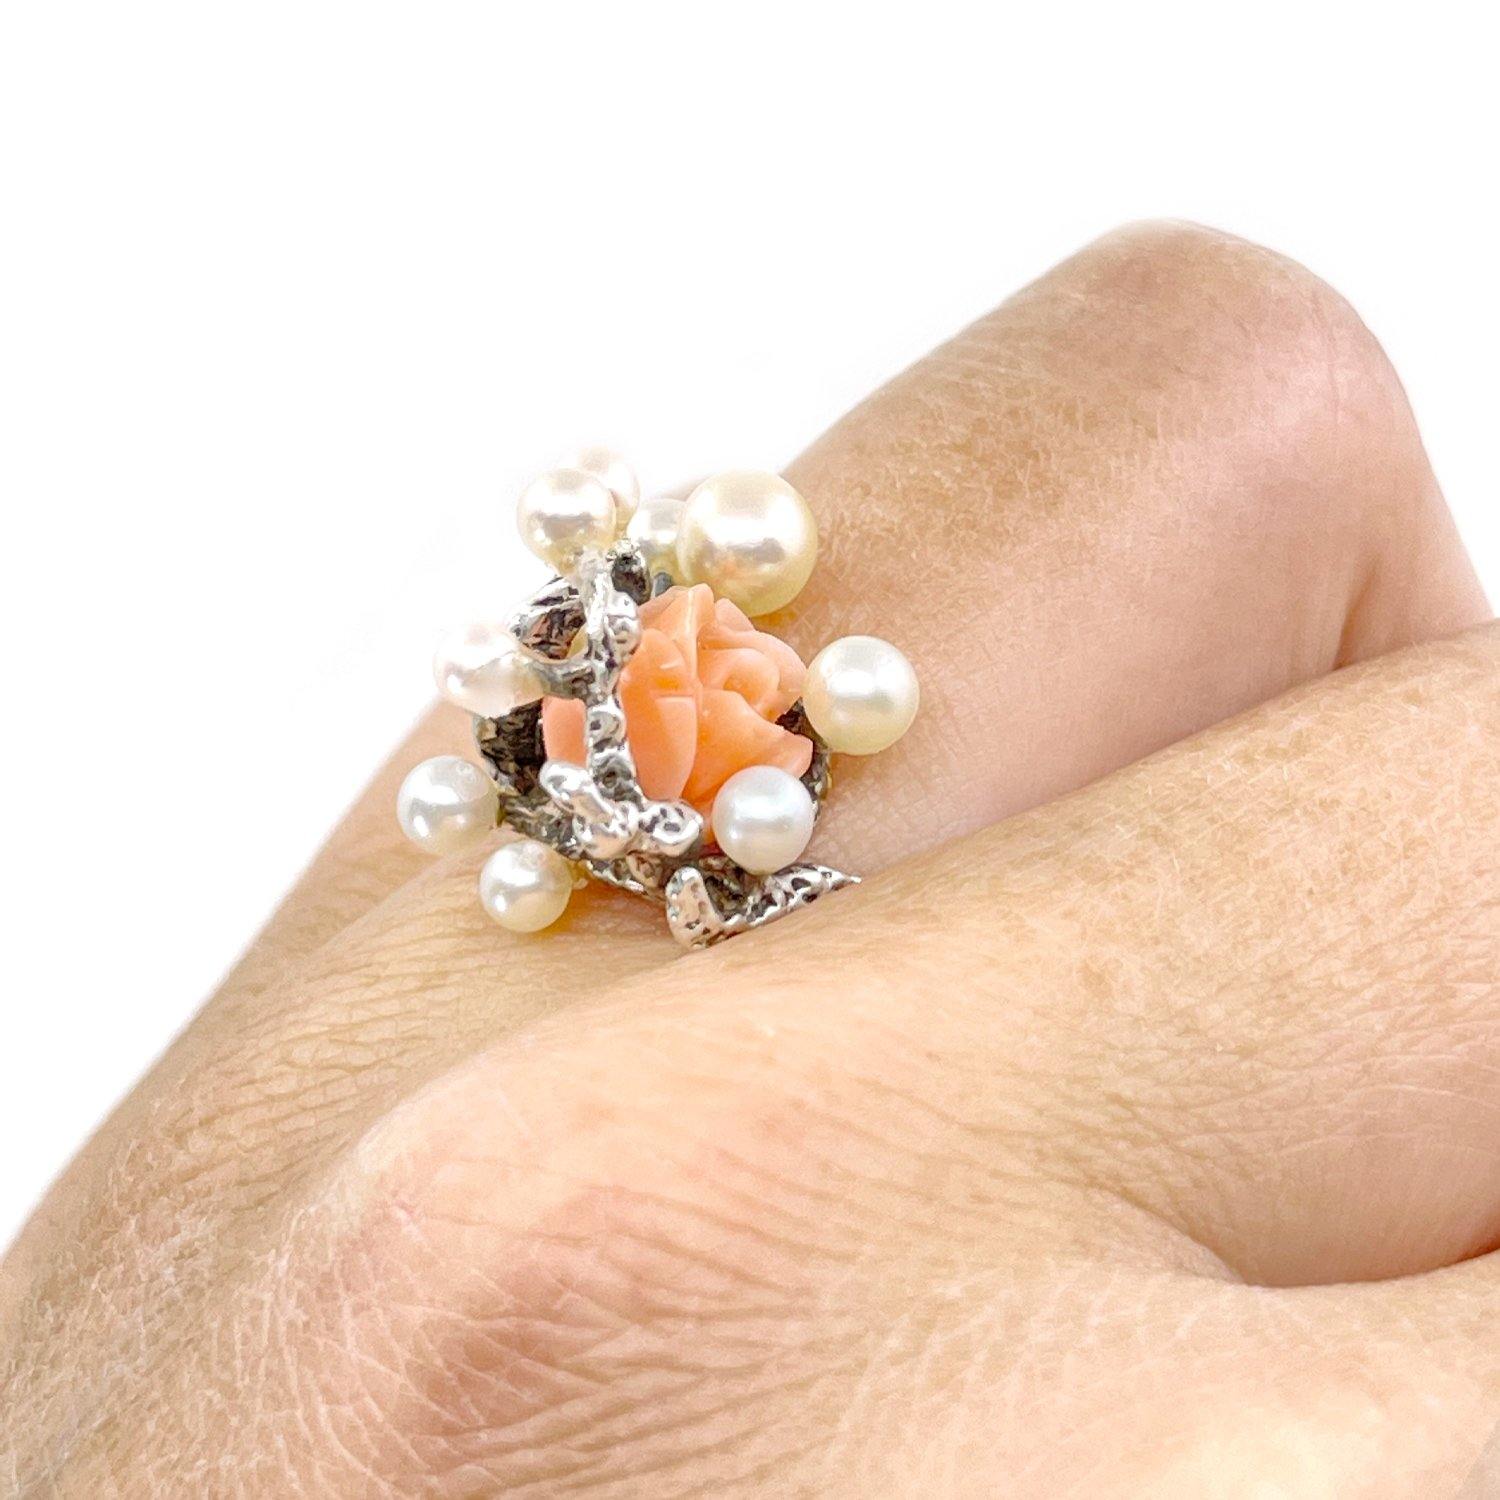 Abstract Salmon Coral Cluster Japanese Saltwater Akoya Cultured Pearl Ring- Sterling Silver Sz 7 1/4